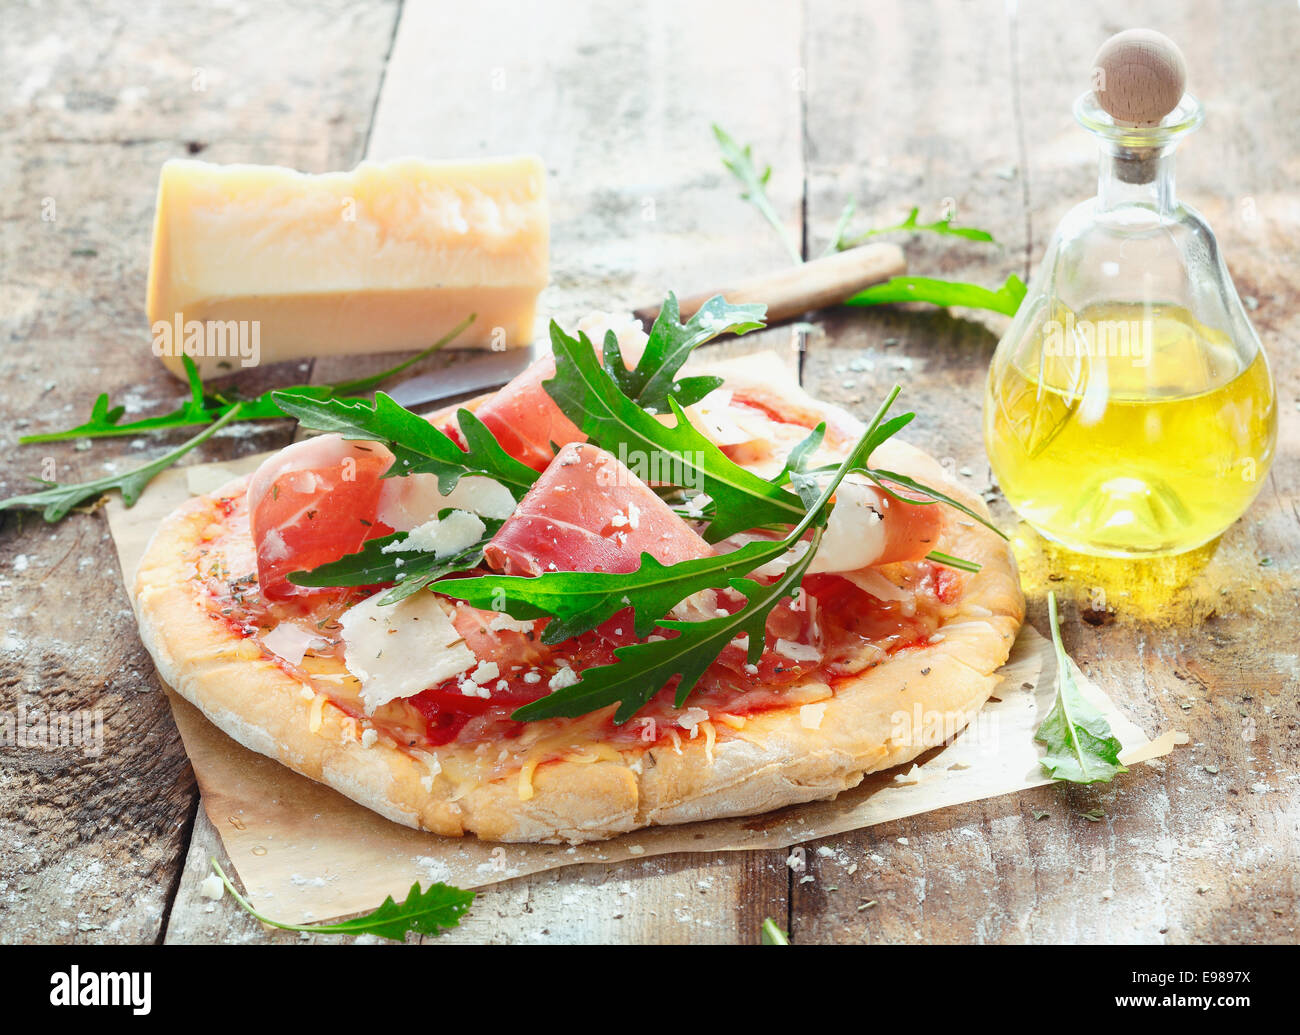 Preparing homemade ham pizza with fresh ingredients including thinly sliced ham, cheese, herbs and tomato Stock Photo